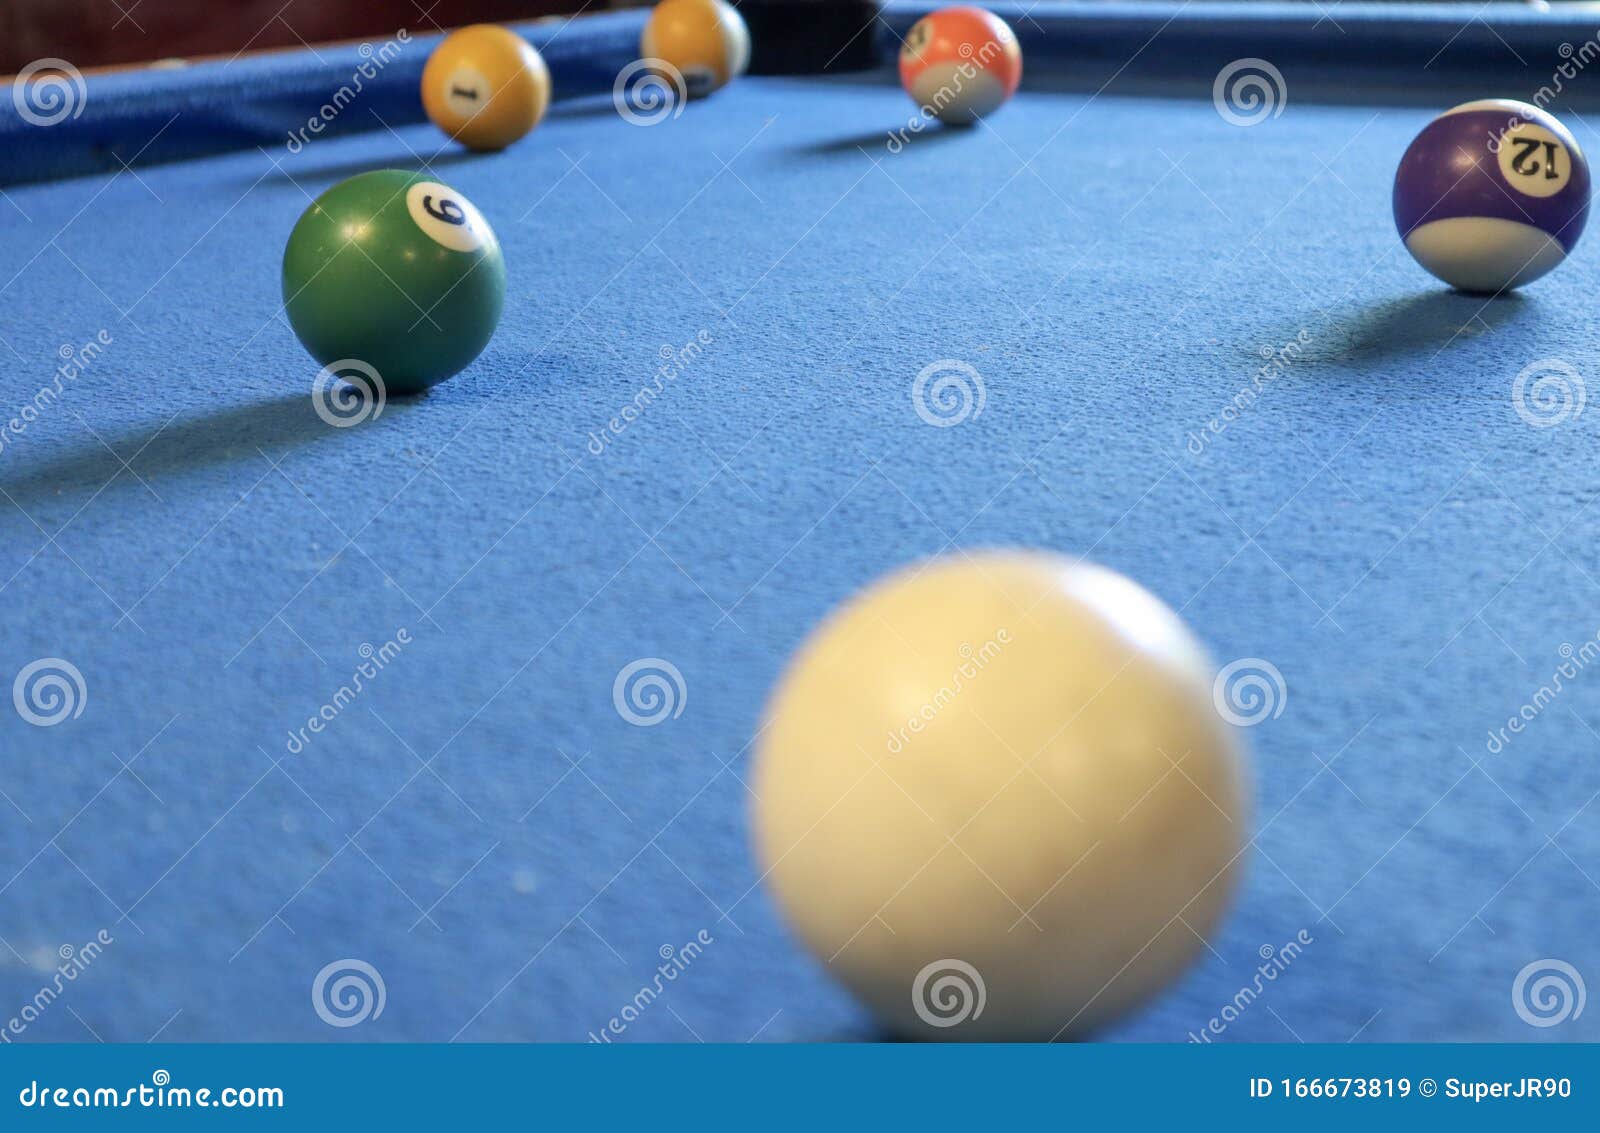 Game Of 8 Ball Pool Billiard On A Table With Balls Stock Image Image Of Sports Balls 166673819